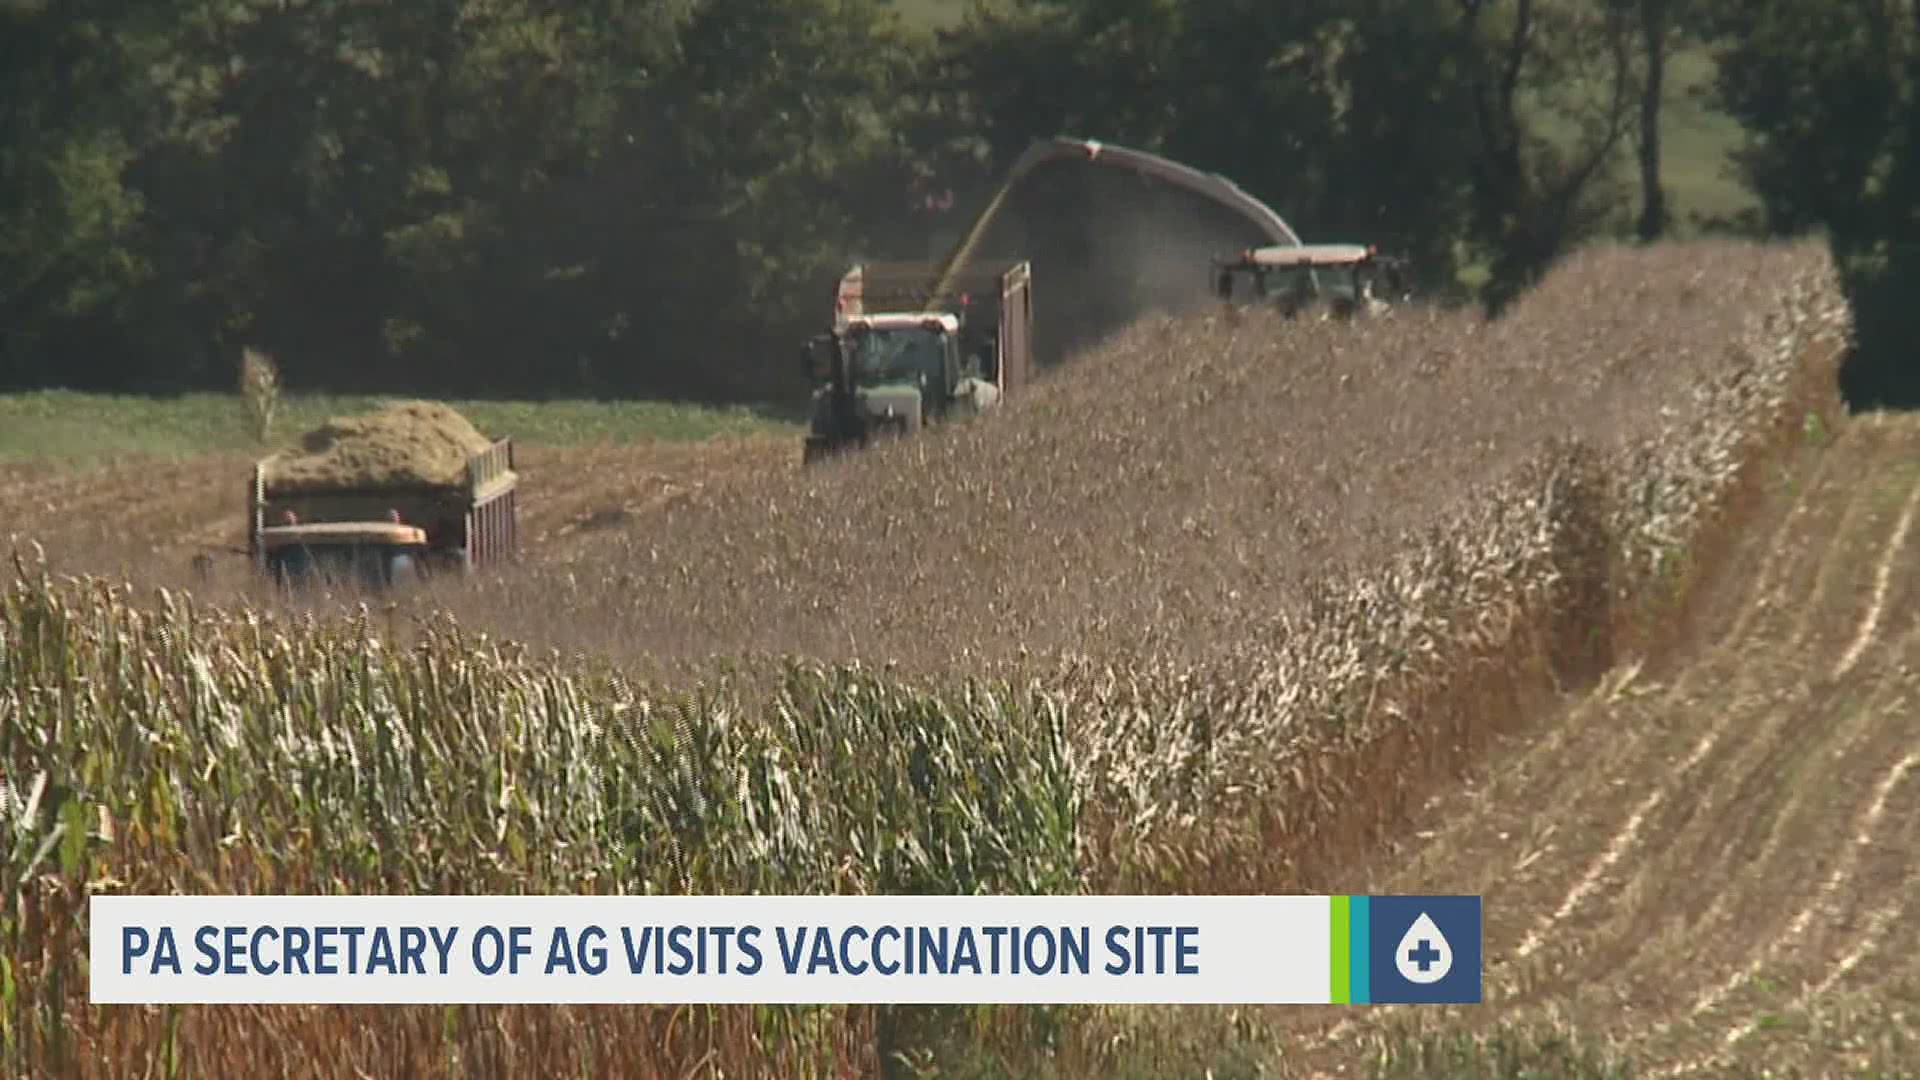 Redding toured the Adams County--WellSpan Health joint community COVID-19 vaccination site to learn more about some of the hurdles they’re facing.